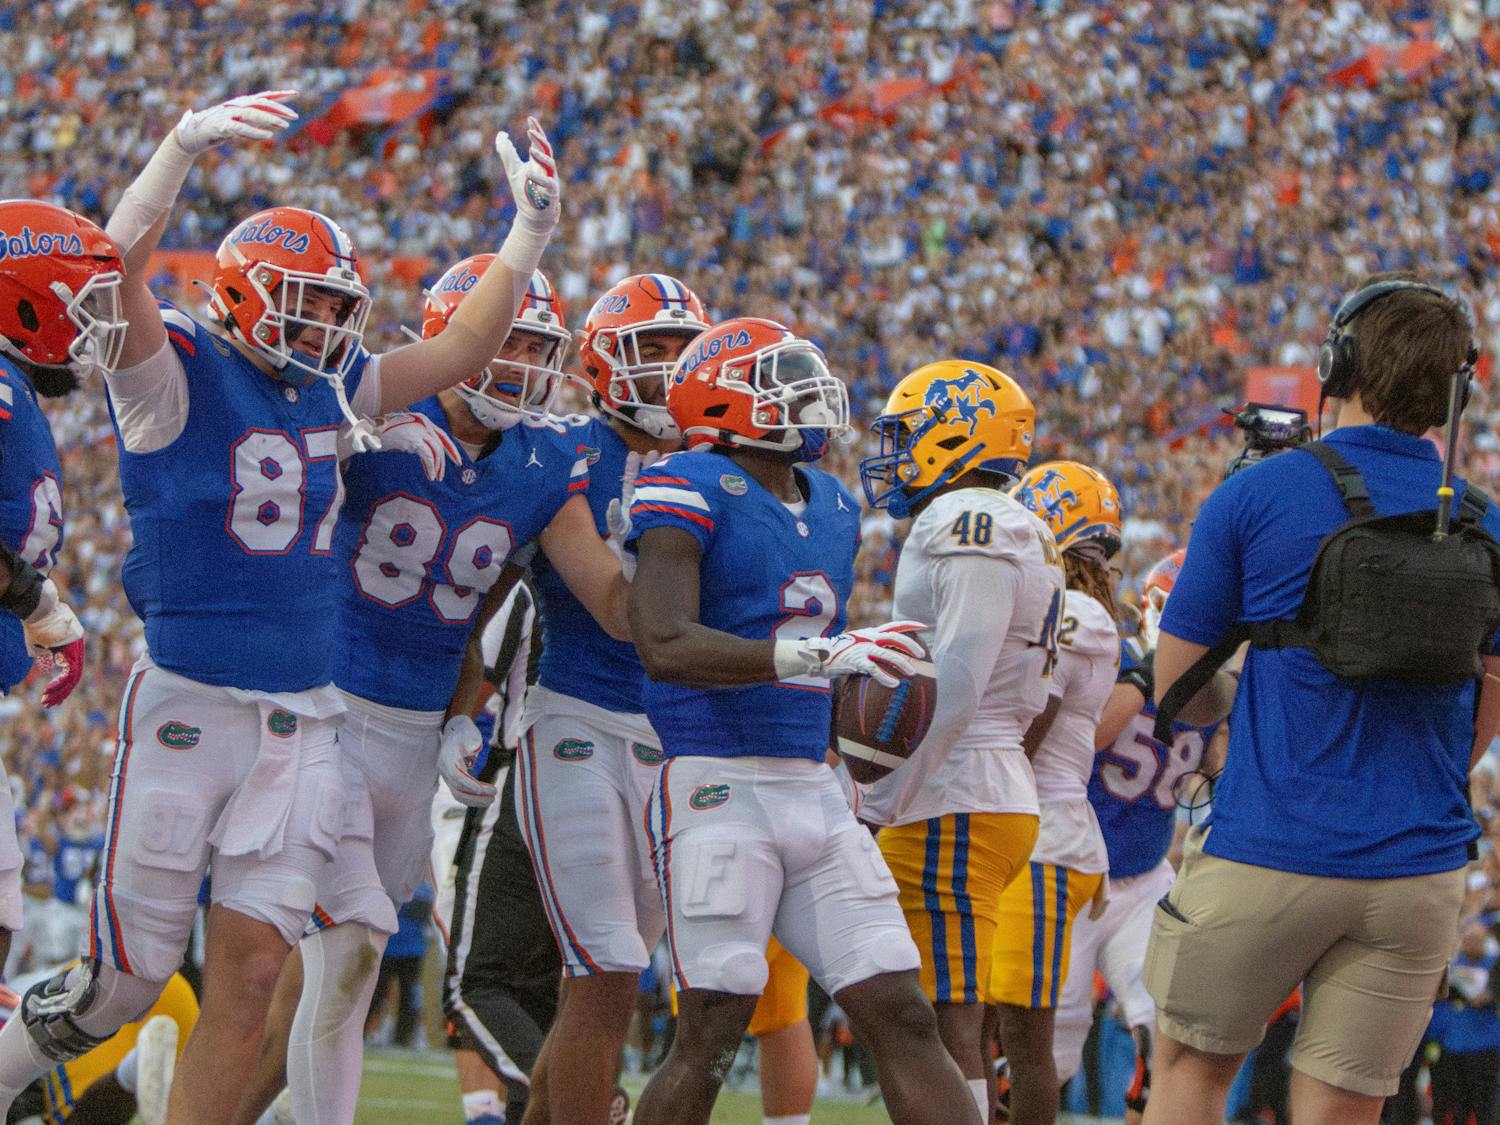 Junior running back Montrell Johnson Jr. celebrates after he scored a rushing touchdown in the Gators' 49-7 win against the McNeese State Cowboys Saturday, Sept. 9, 2023.